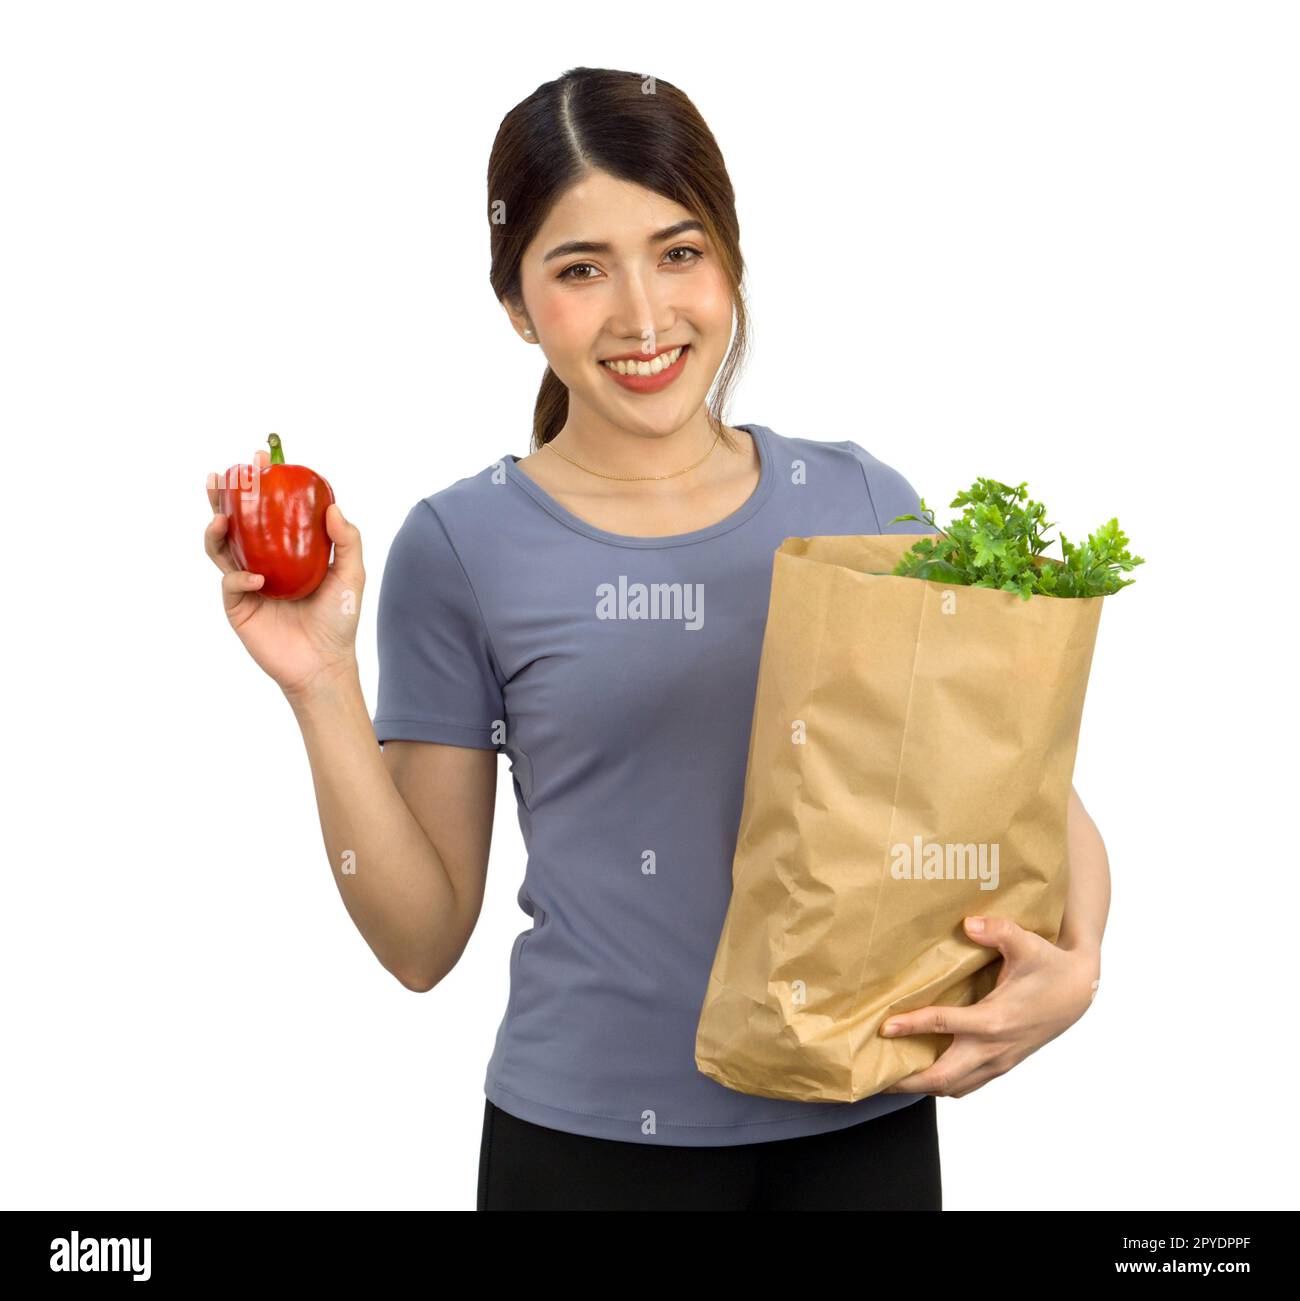 https://c8.alamy.com/comp/2PYDPPF/young-asian-woman-in-casual-clothes-stand-smiling-hold-a-red-bell-pepper-while-the-other-hand-holding-a-paper-bag-full-of-vegetables-portrait-on-white-background-with-studio-light-isolated-2PYDPPF.jpg